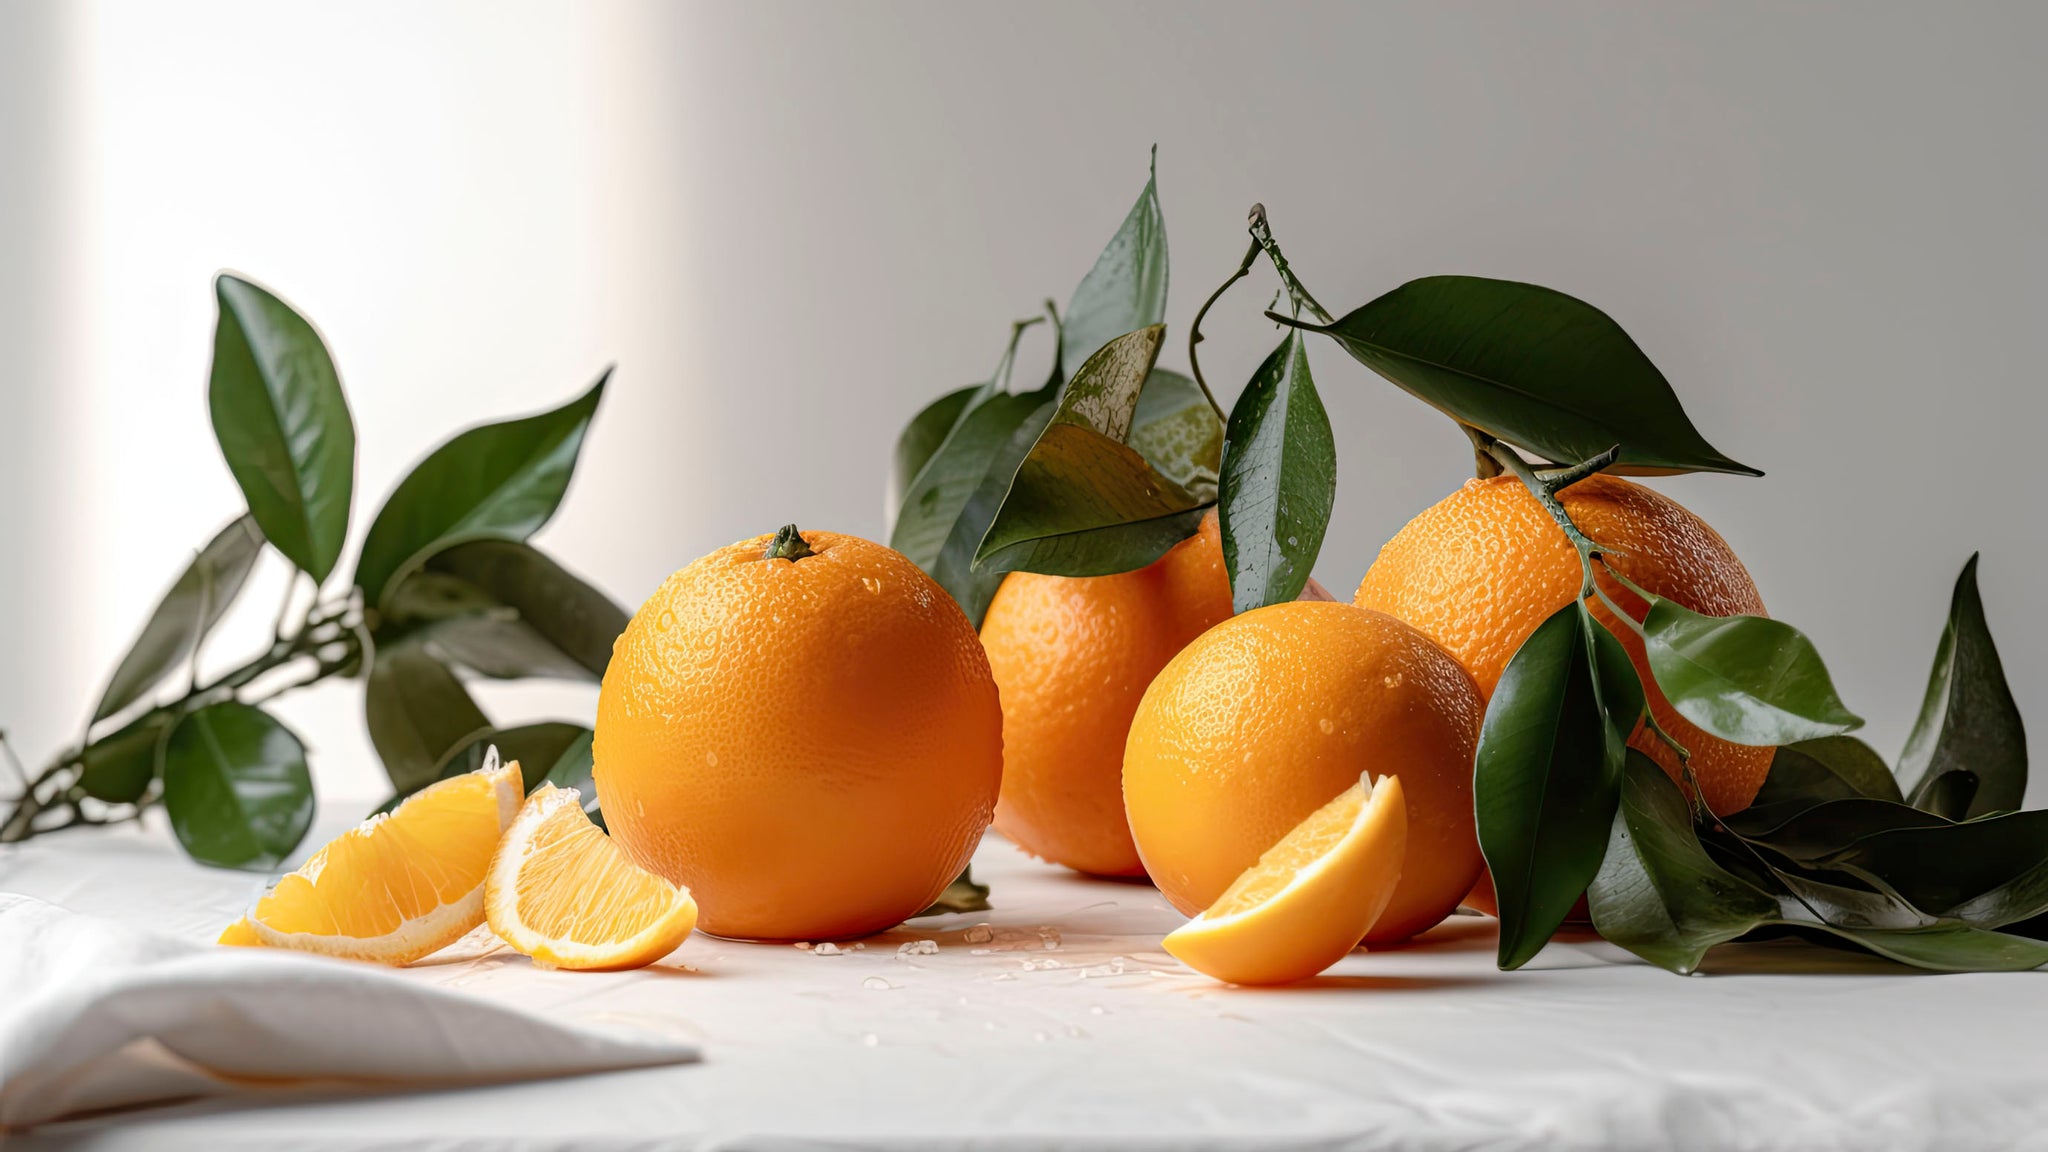 How to prepare your orange for a timeless cocktail garnish